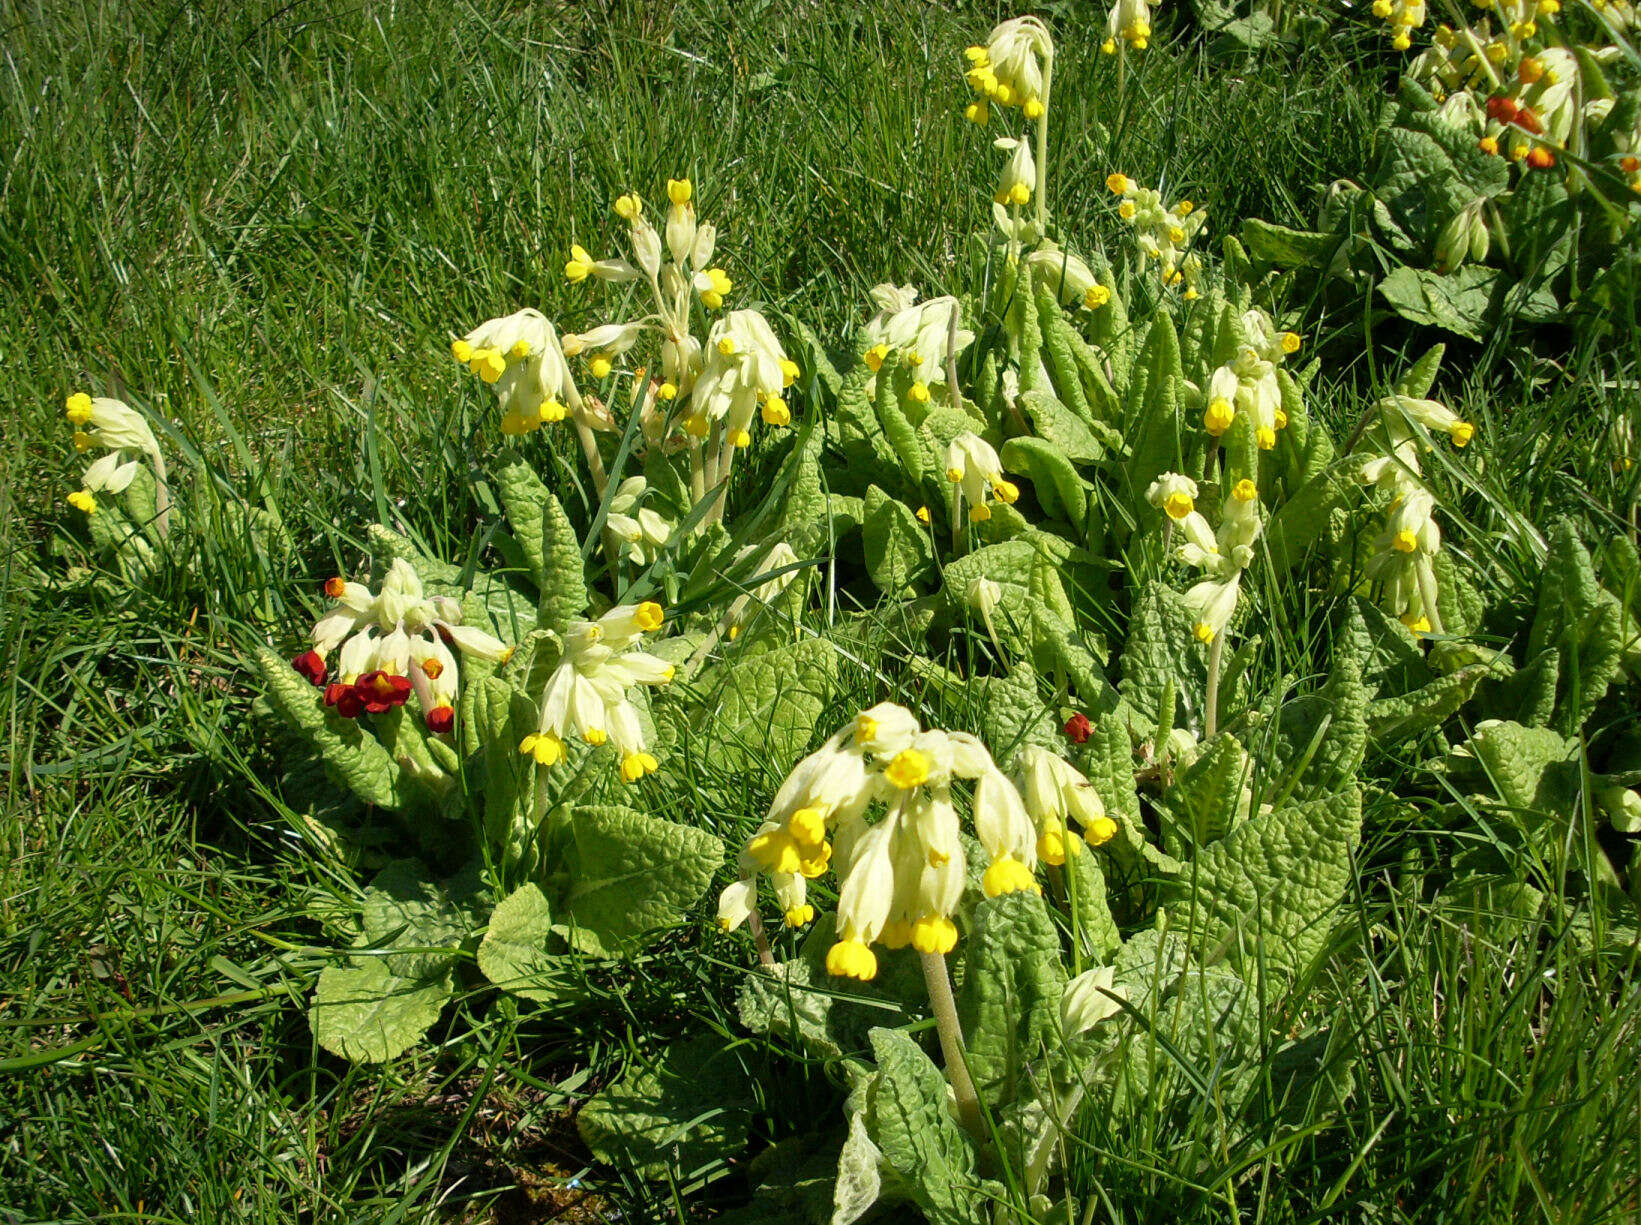 Image of Cowslip